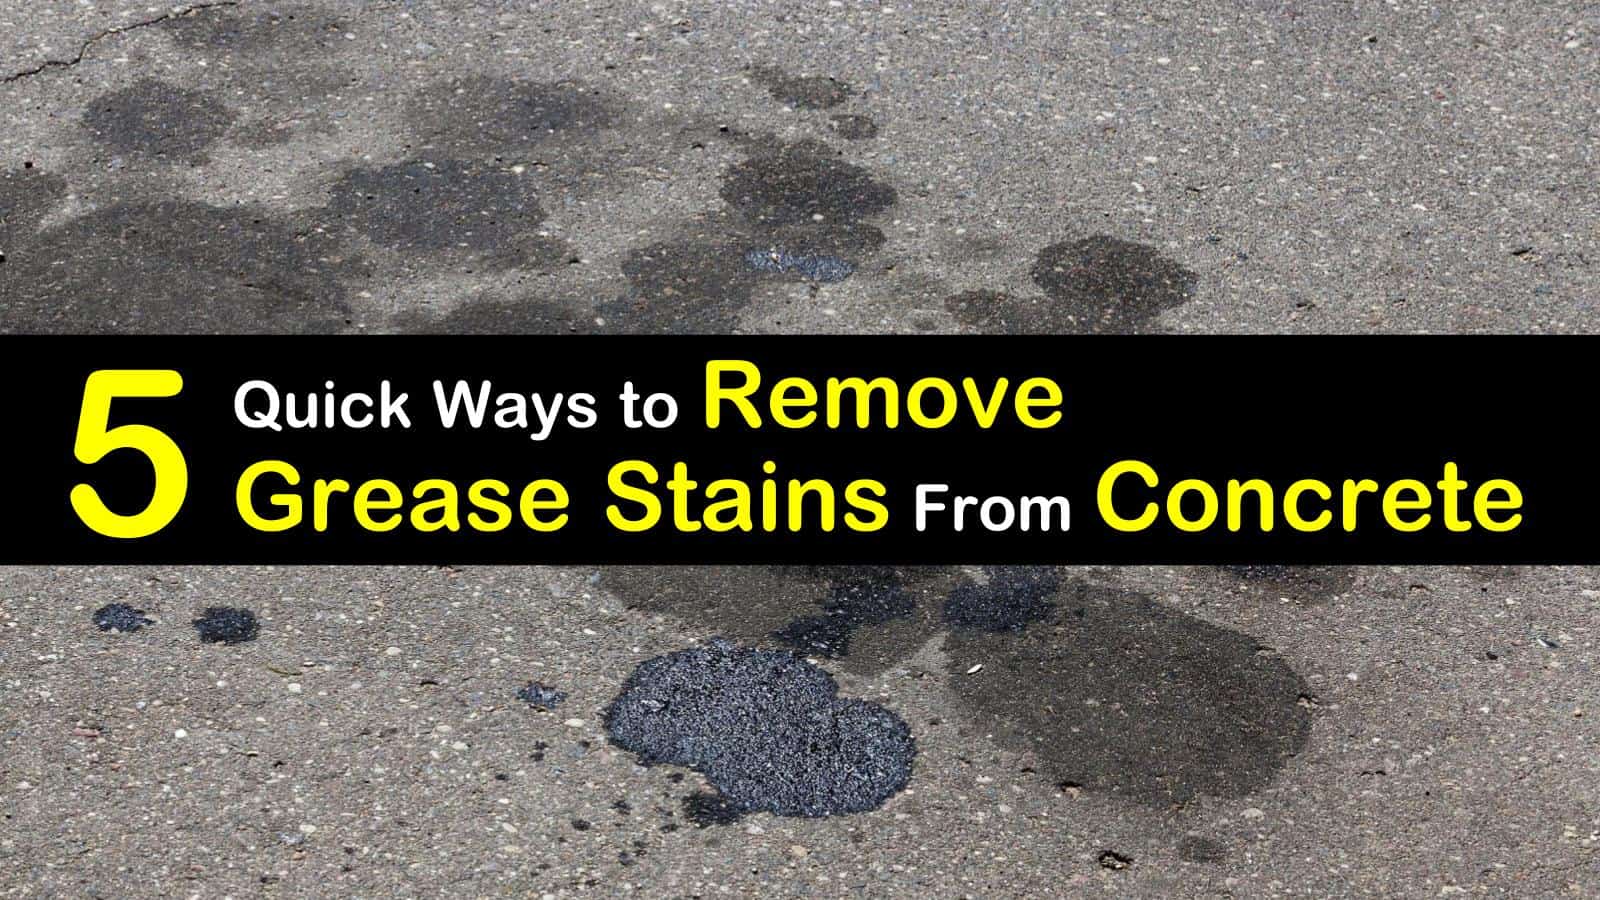 how to remove grease stains from concrete titleimg1